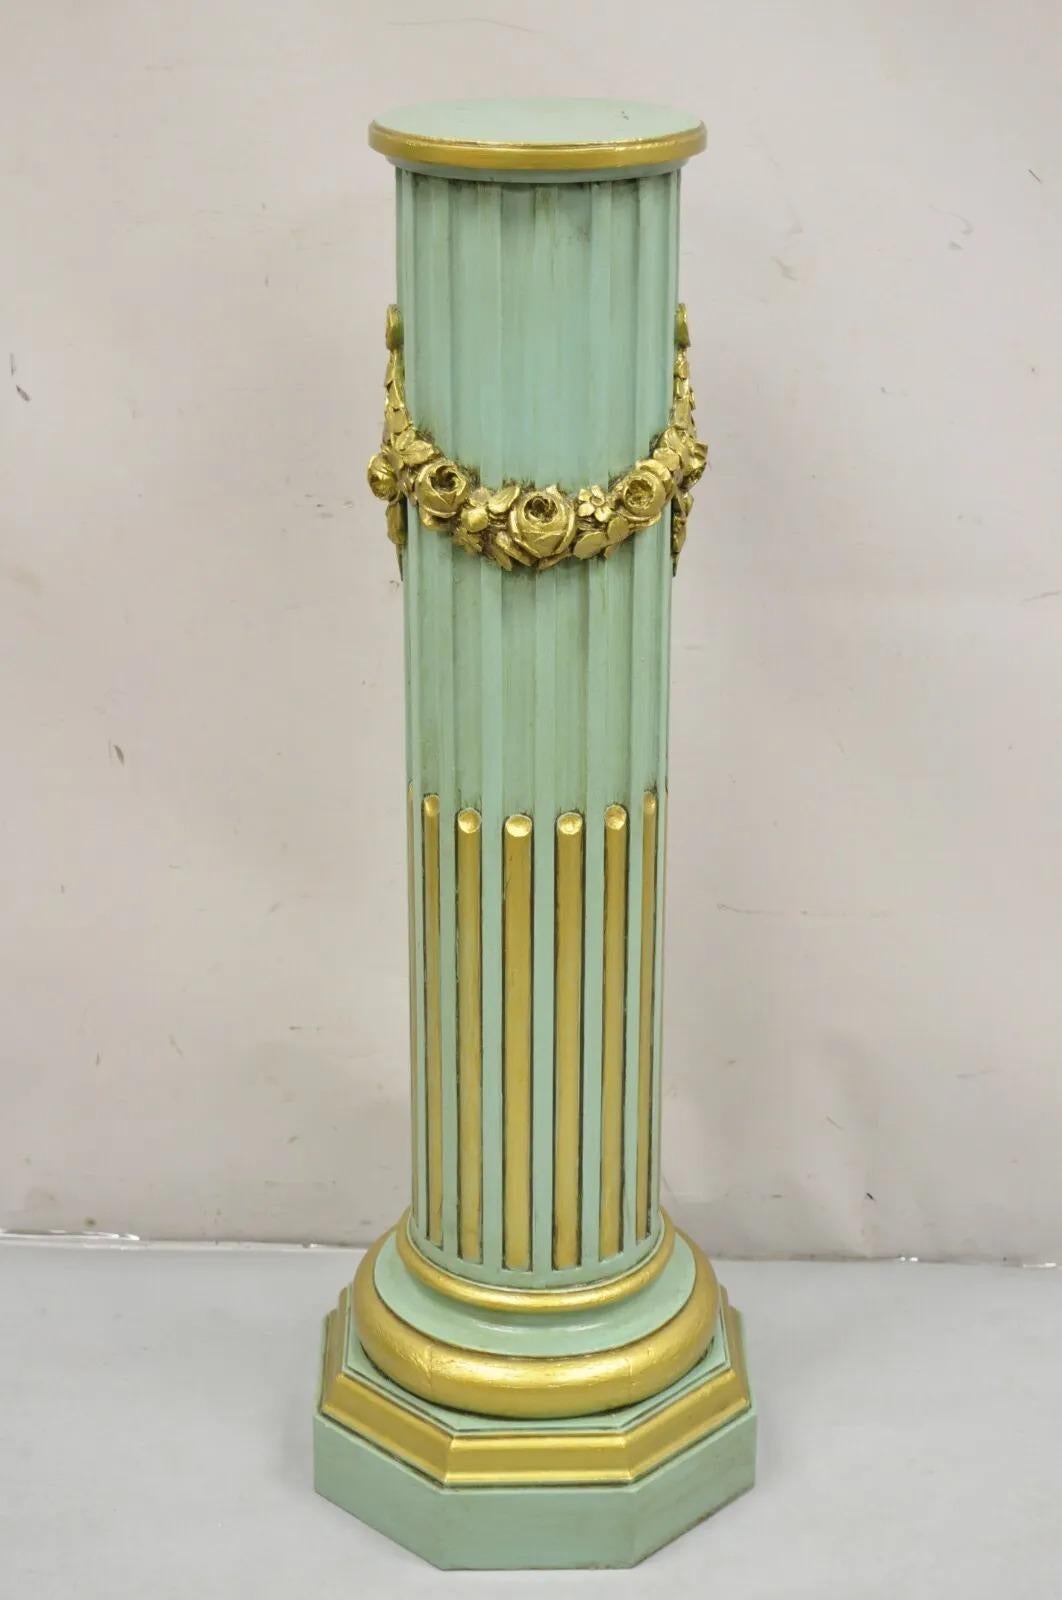 Italian Neoclassical French Empire Green & Gold Painted Wooden Column Pedestal For Sale 4